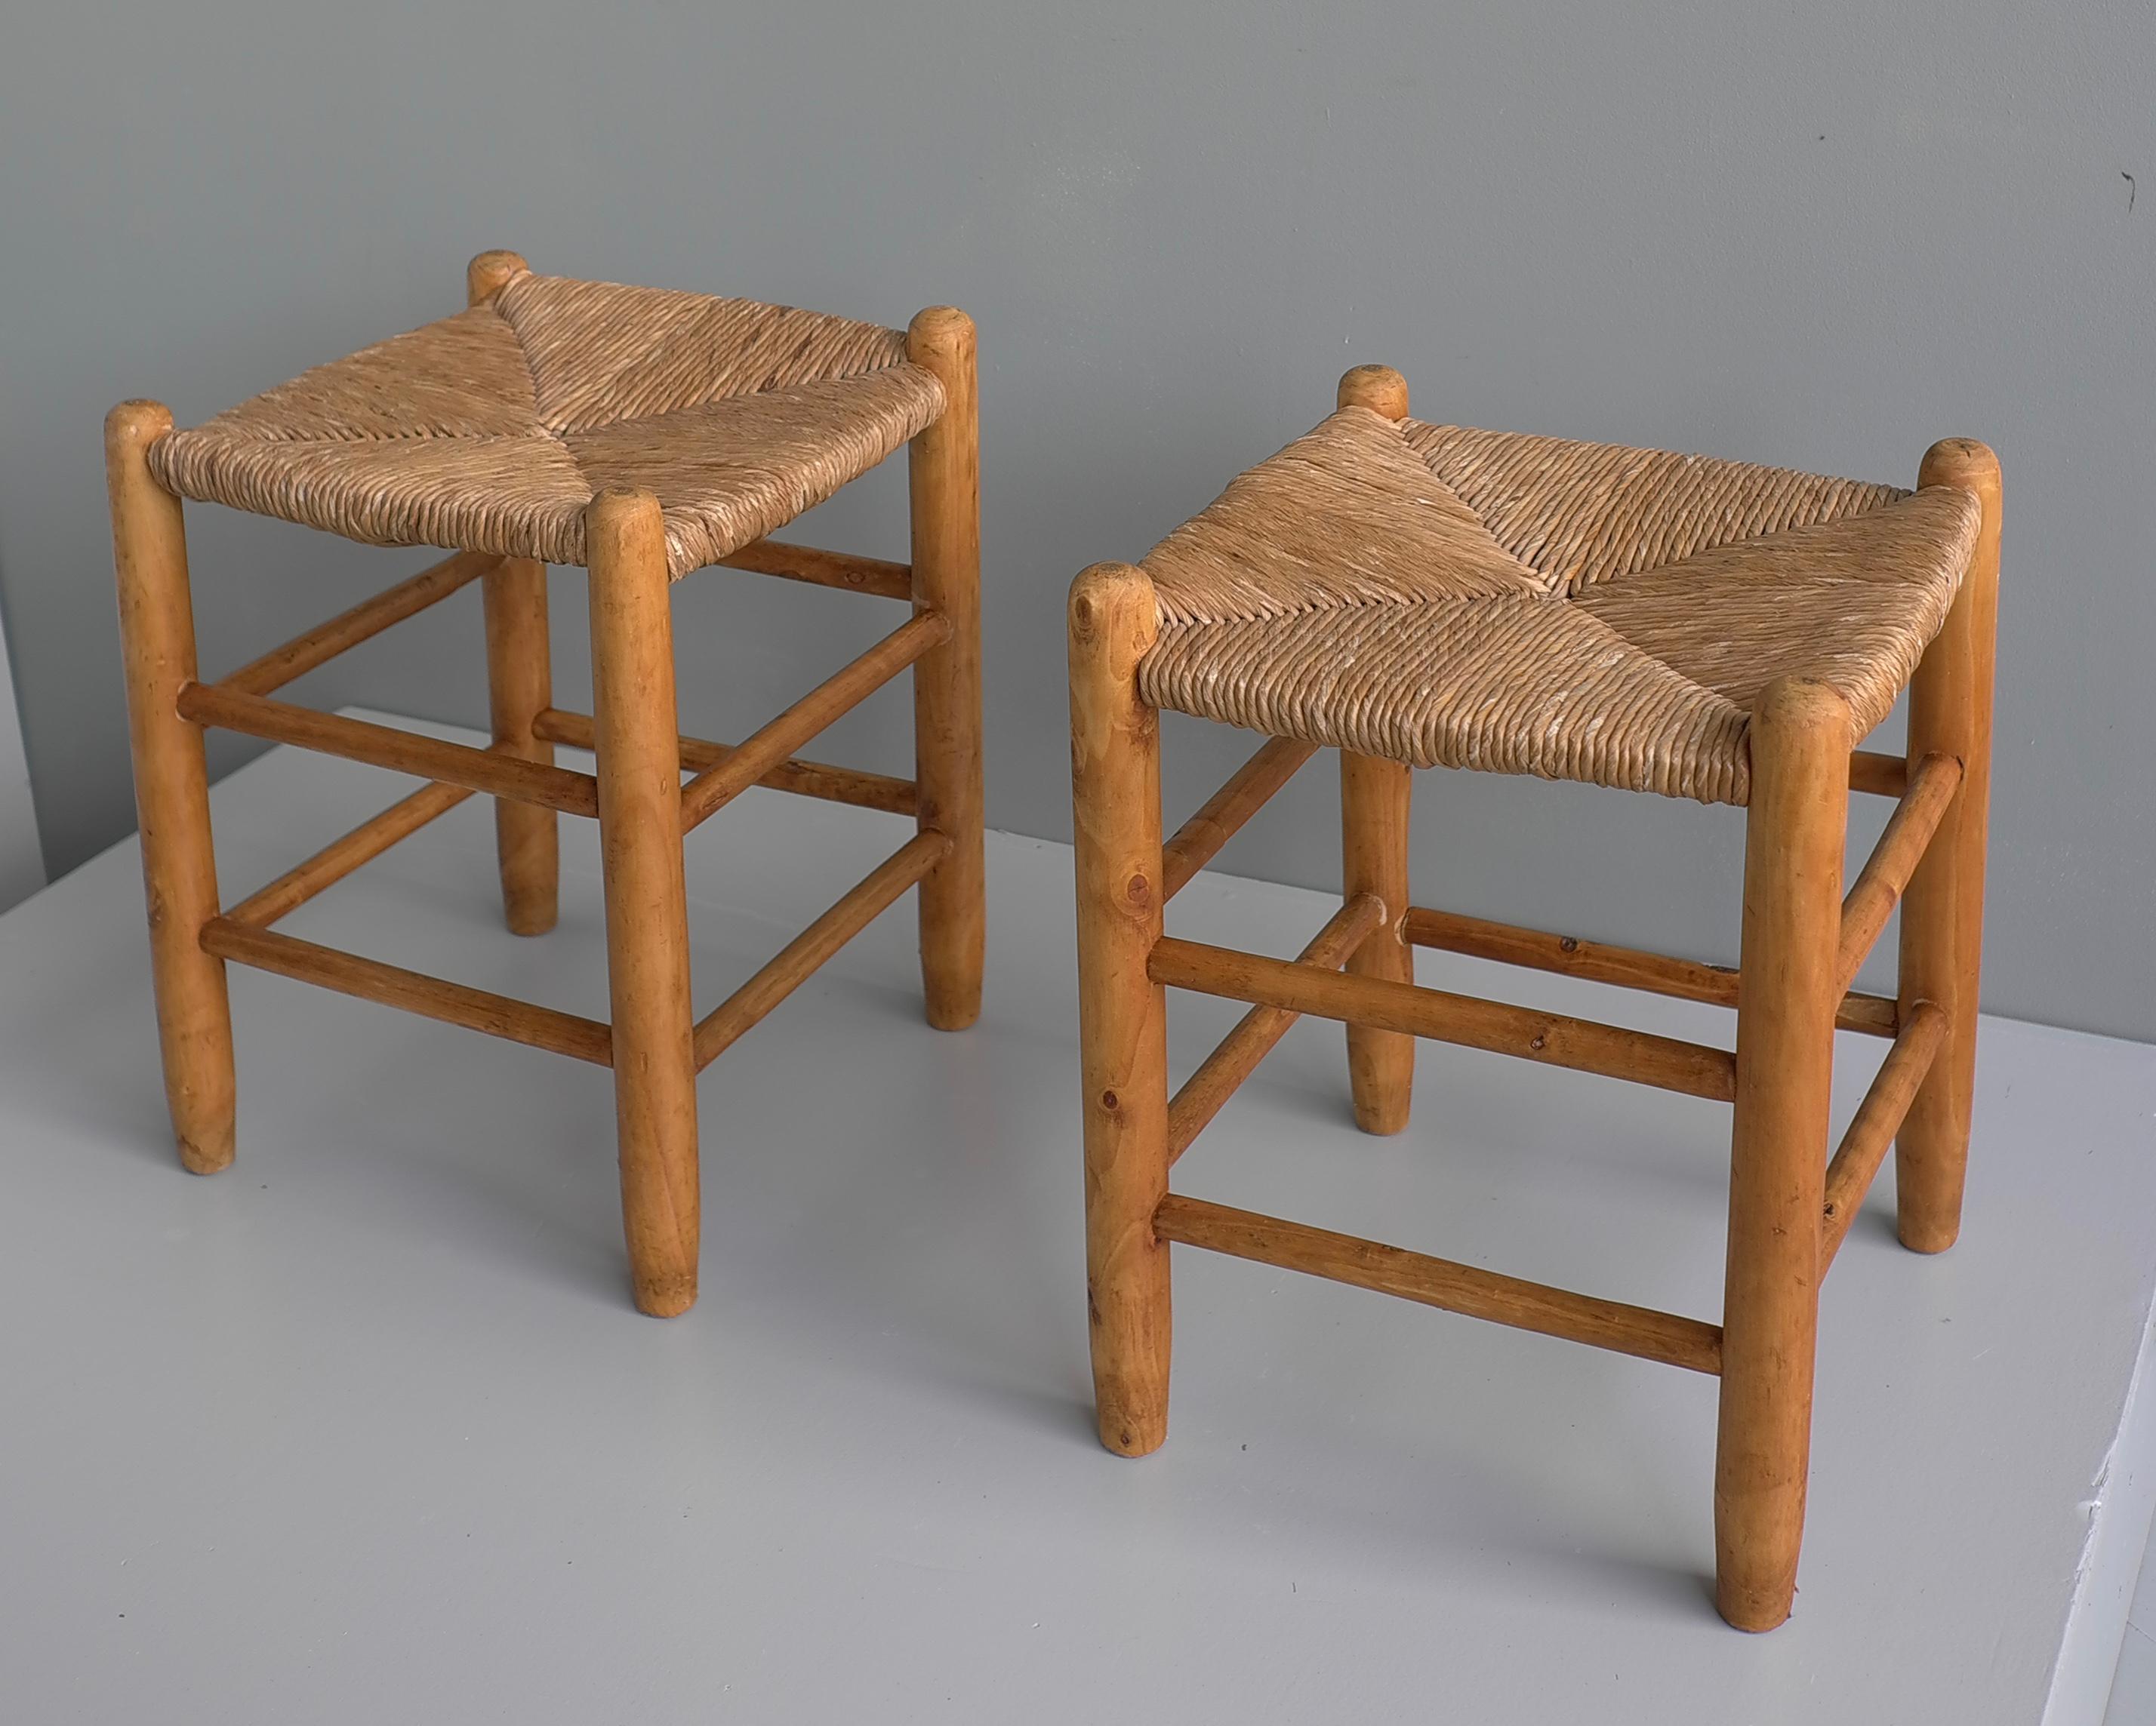 Pair of wood and rush stools in style of Charlotte Perriand, France 1960's.